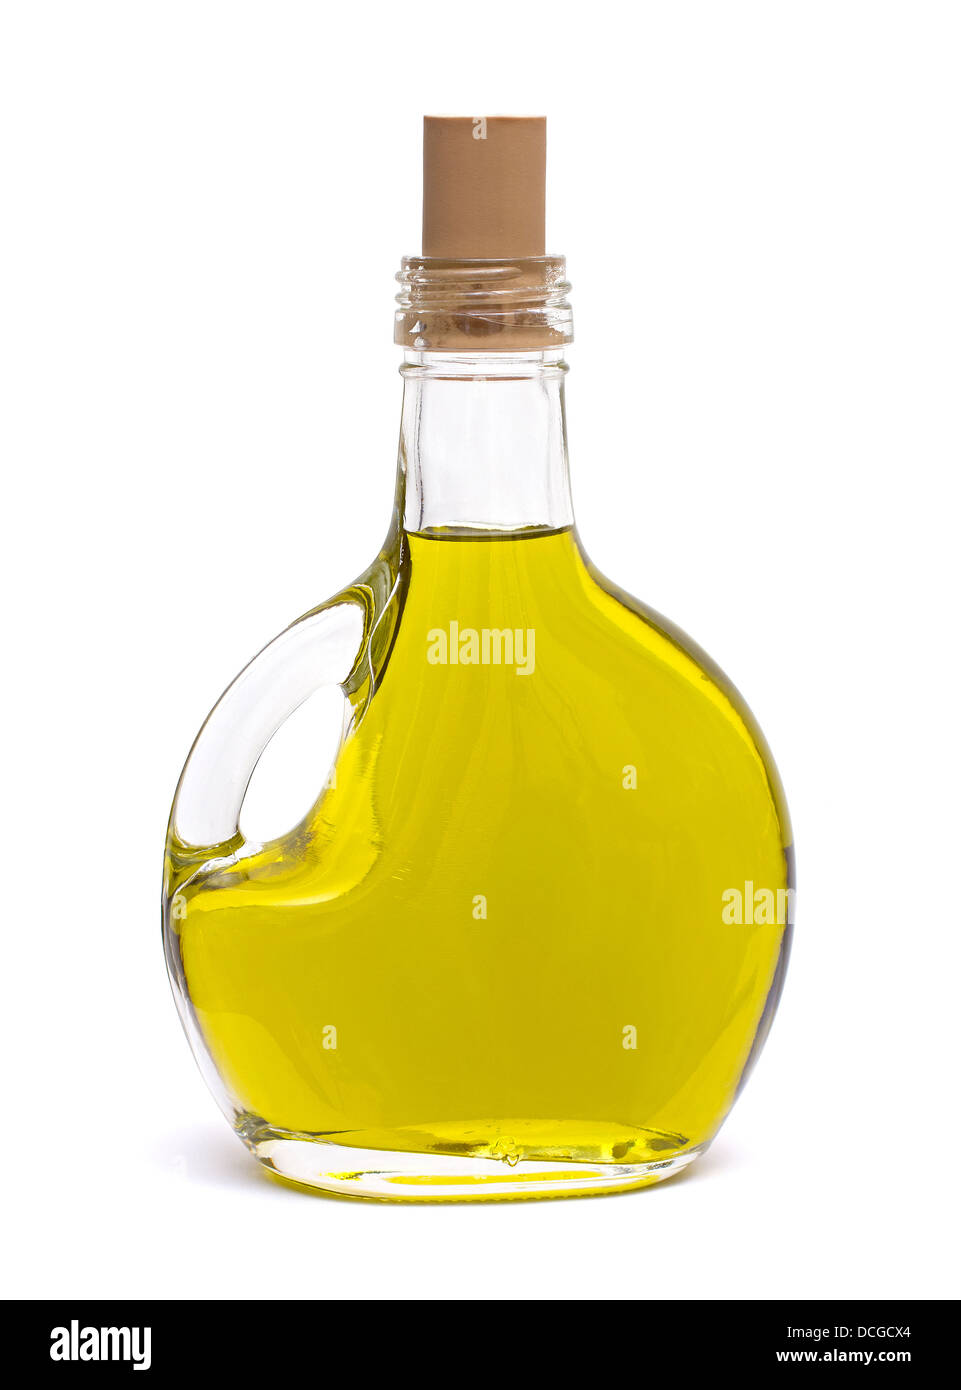 Extra virgin olive oil bottle Cut Out Stock Images & Pictures - Alamy